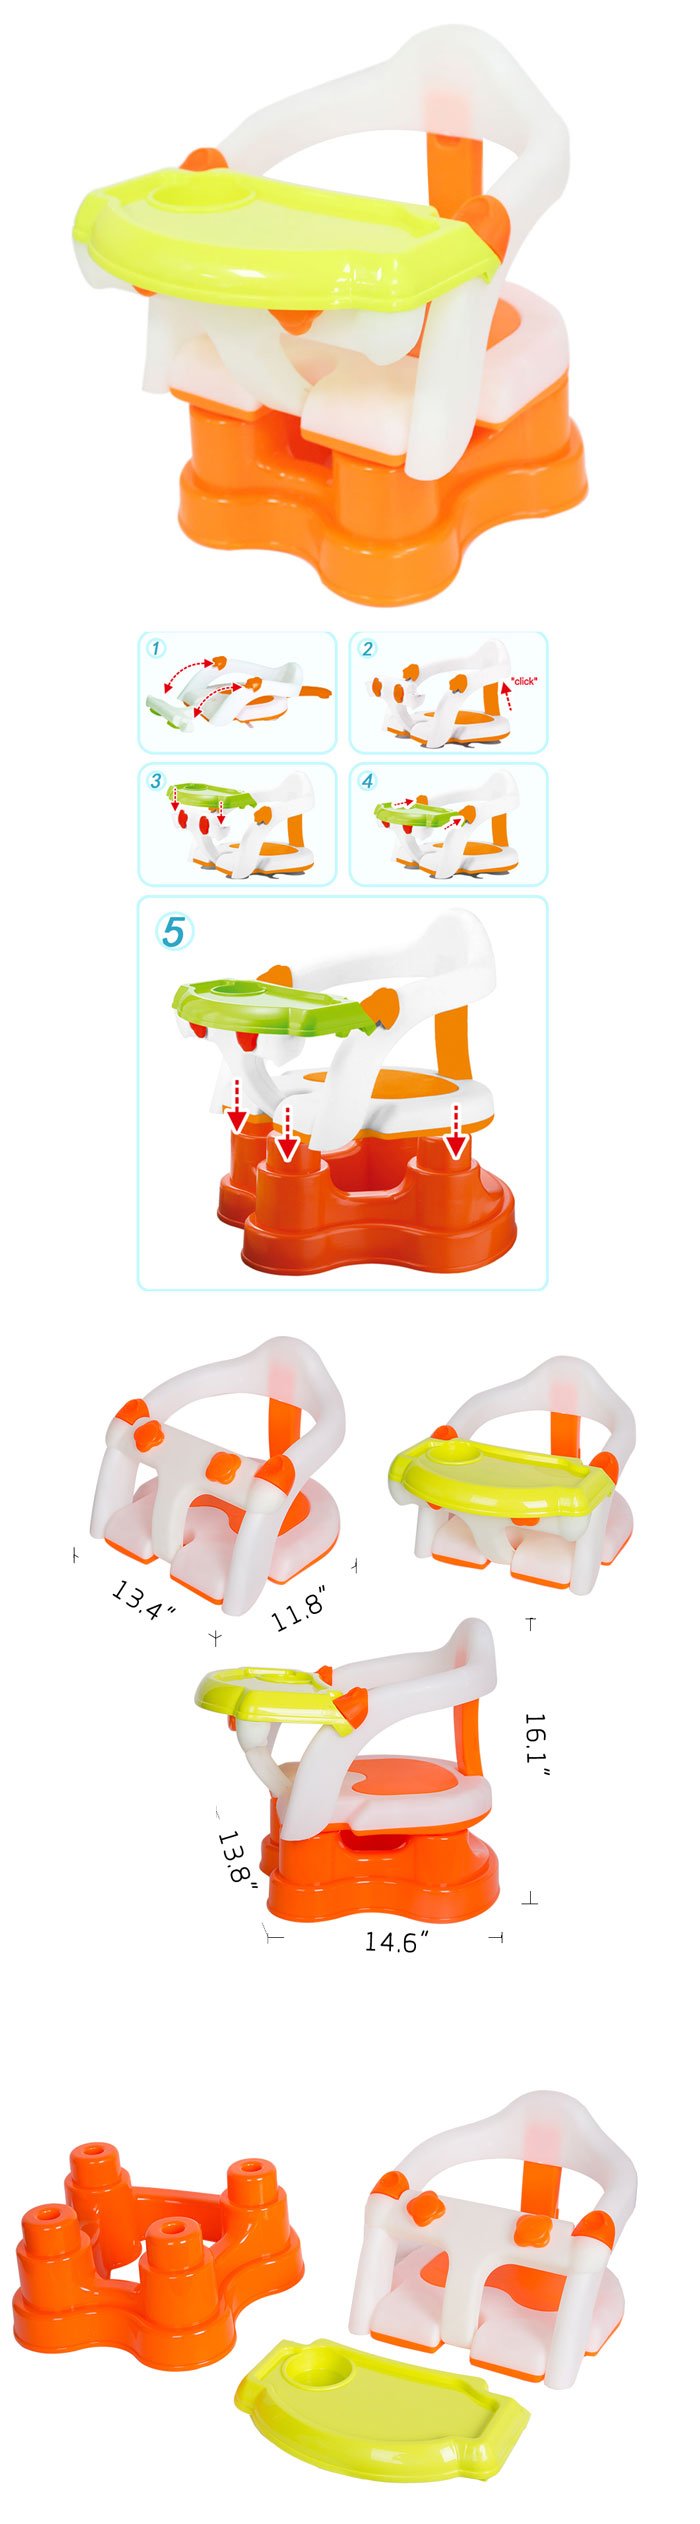 Baby Sit Snack & Go 3 in 1 Convertible Booster